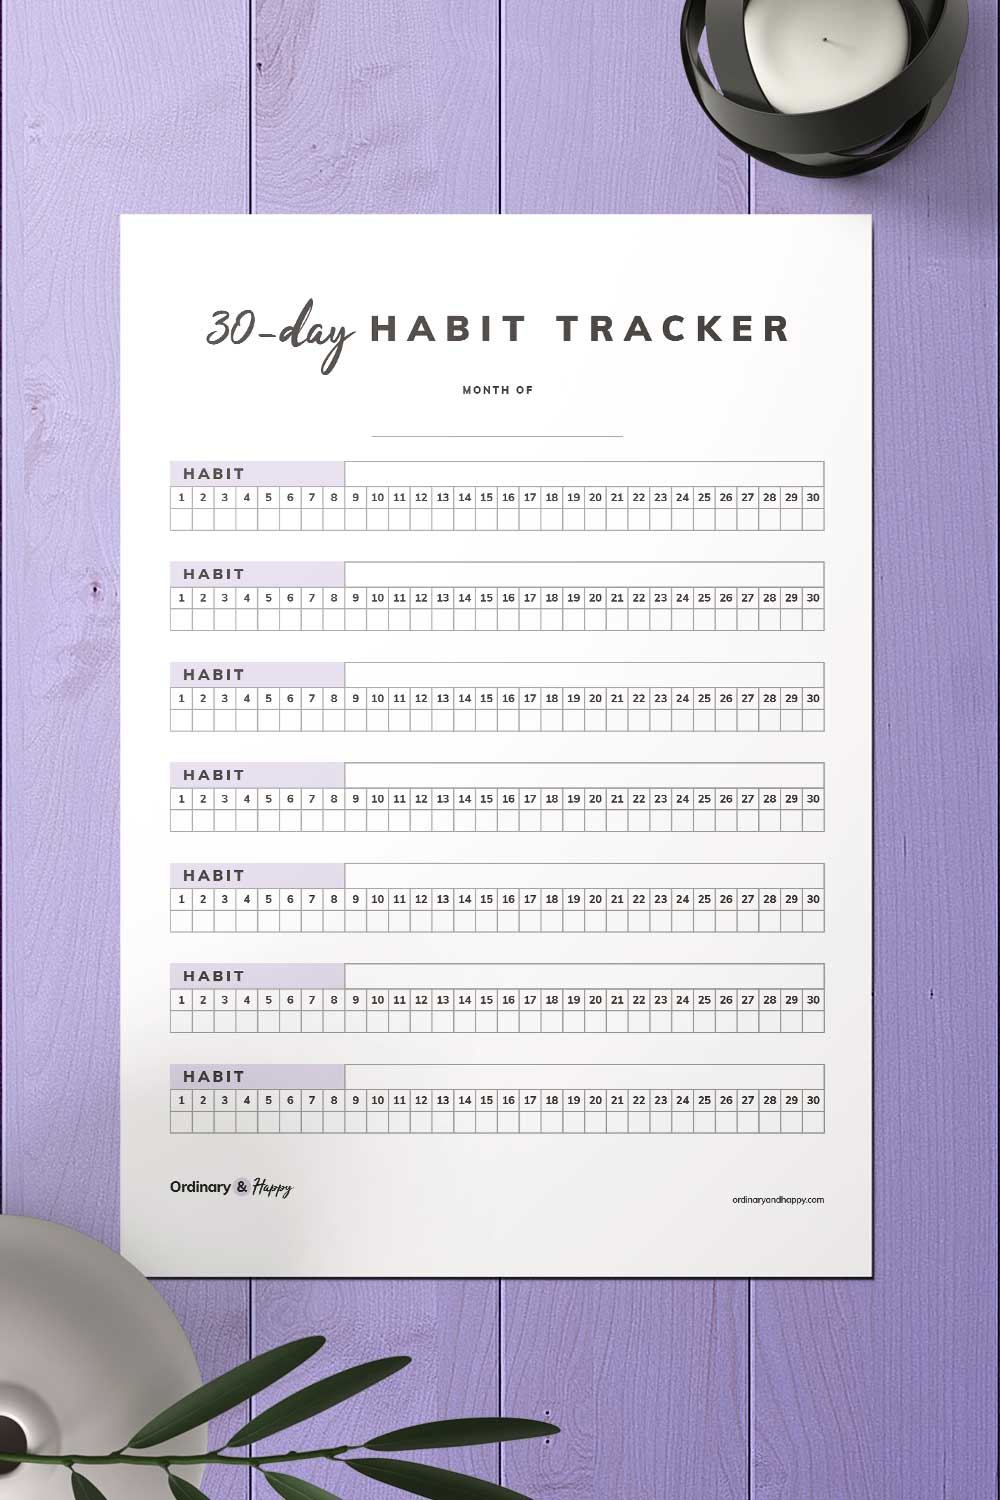 5 Best 30 Day Habit Tracker Printables Free And Premium Ordinary And Happy